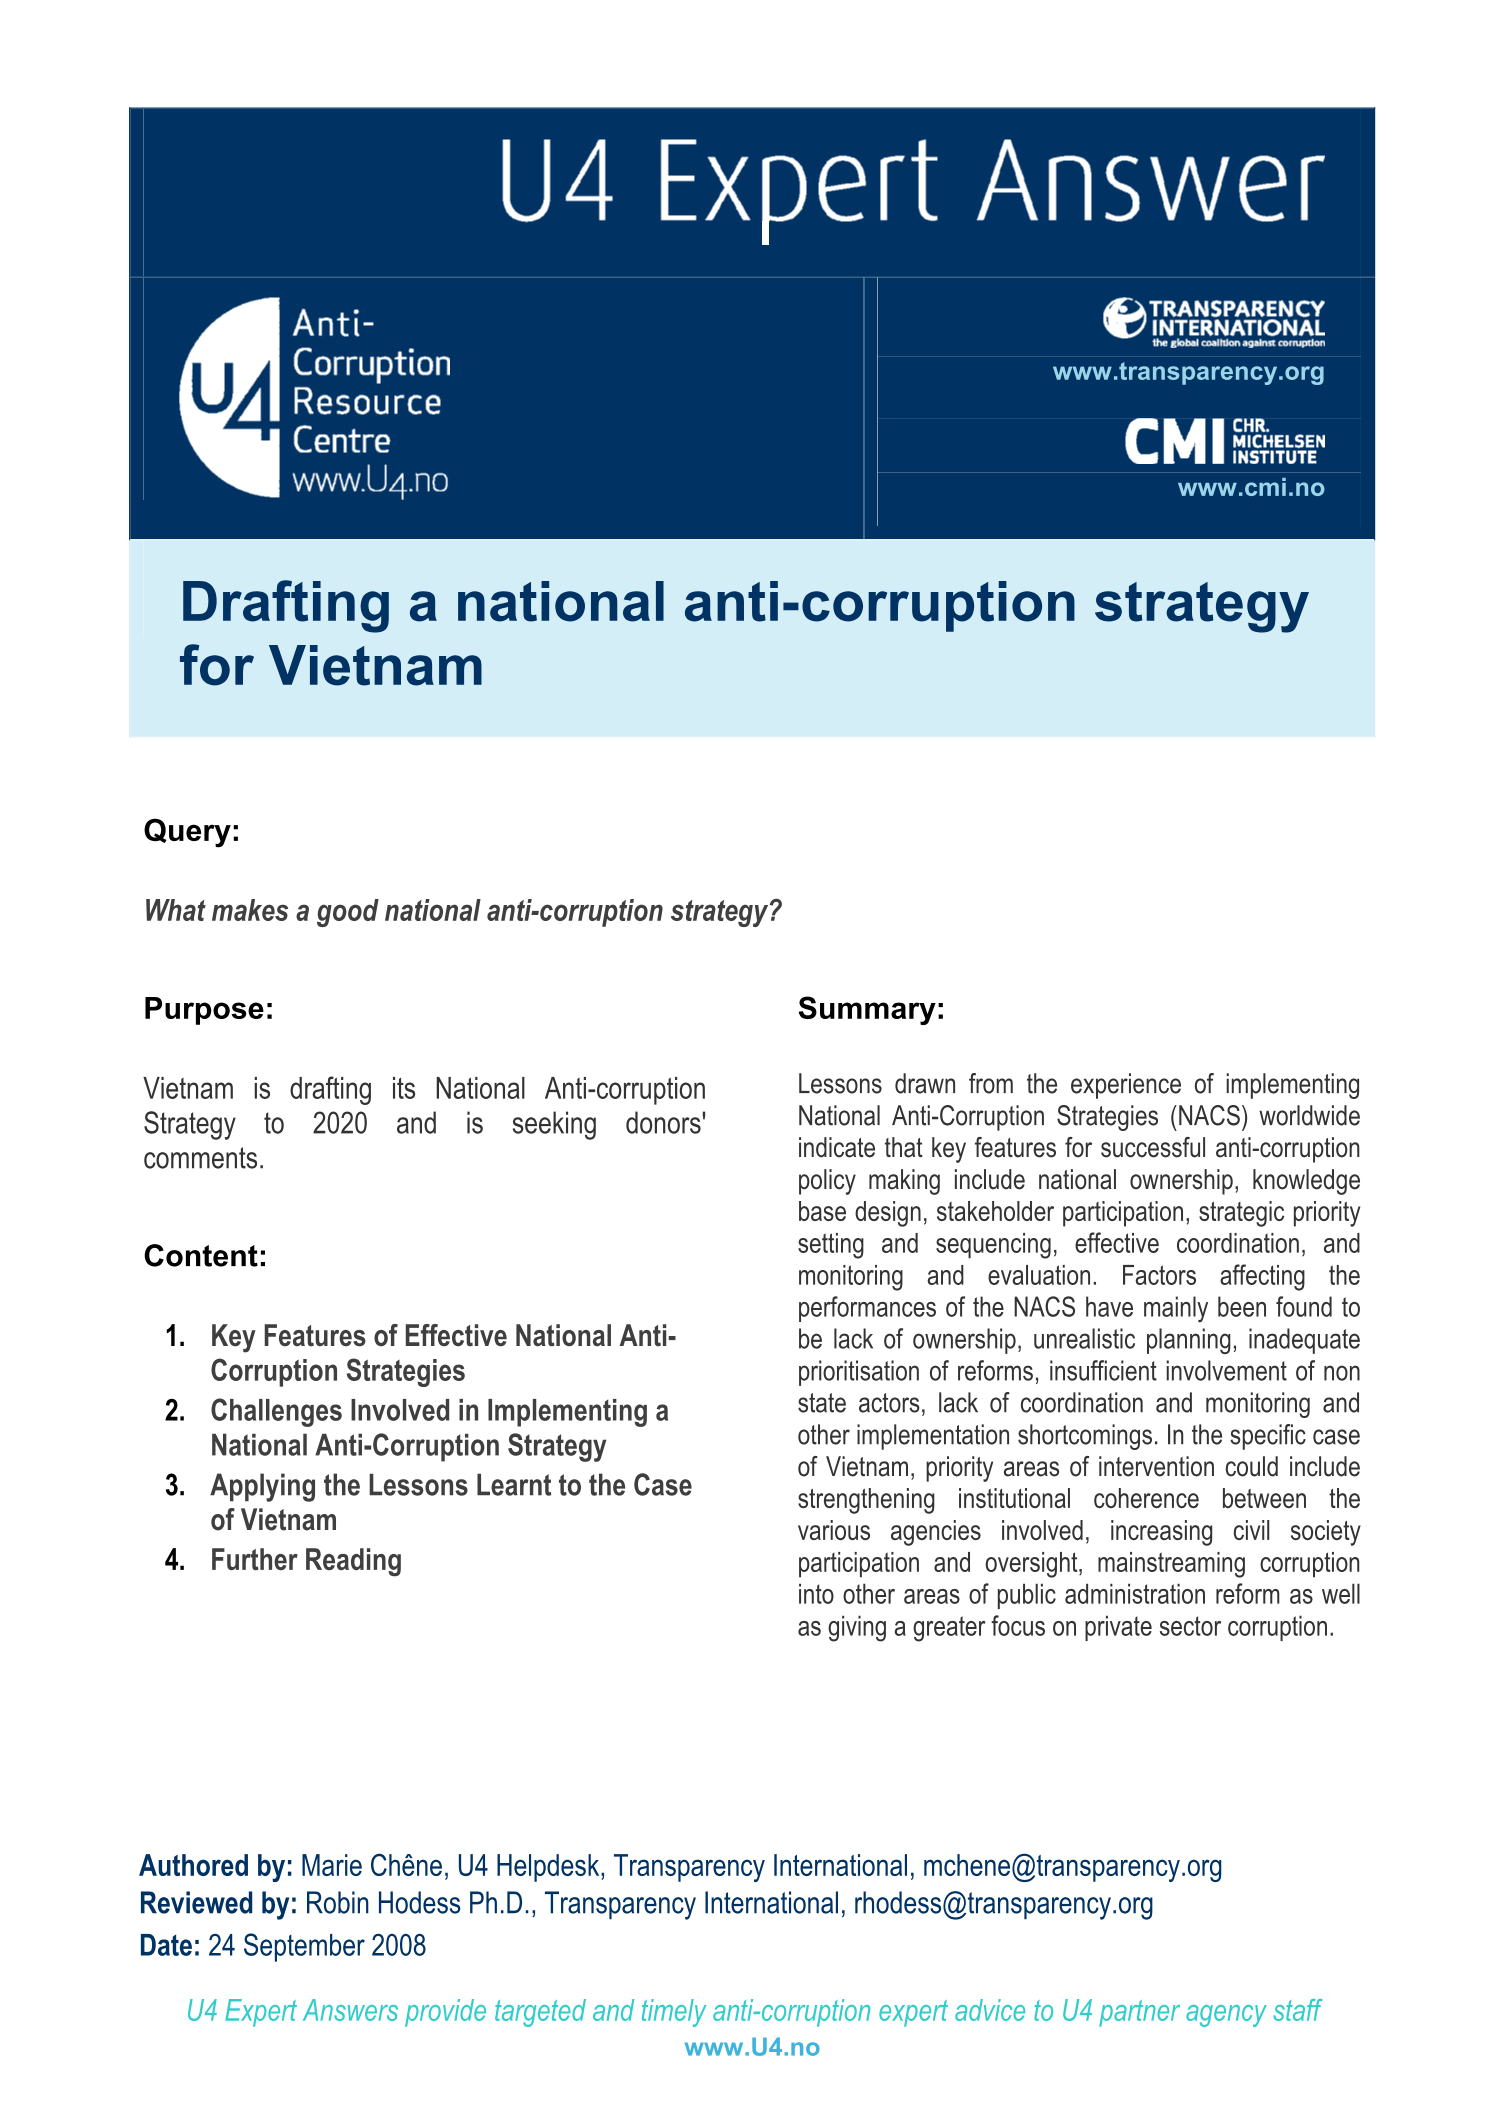 Drafting a national anti-corruption strategy for Vietnam